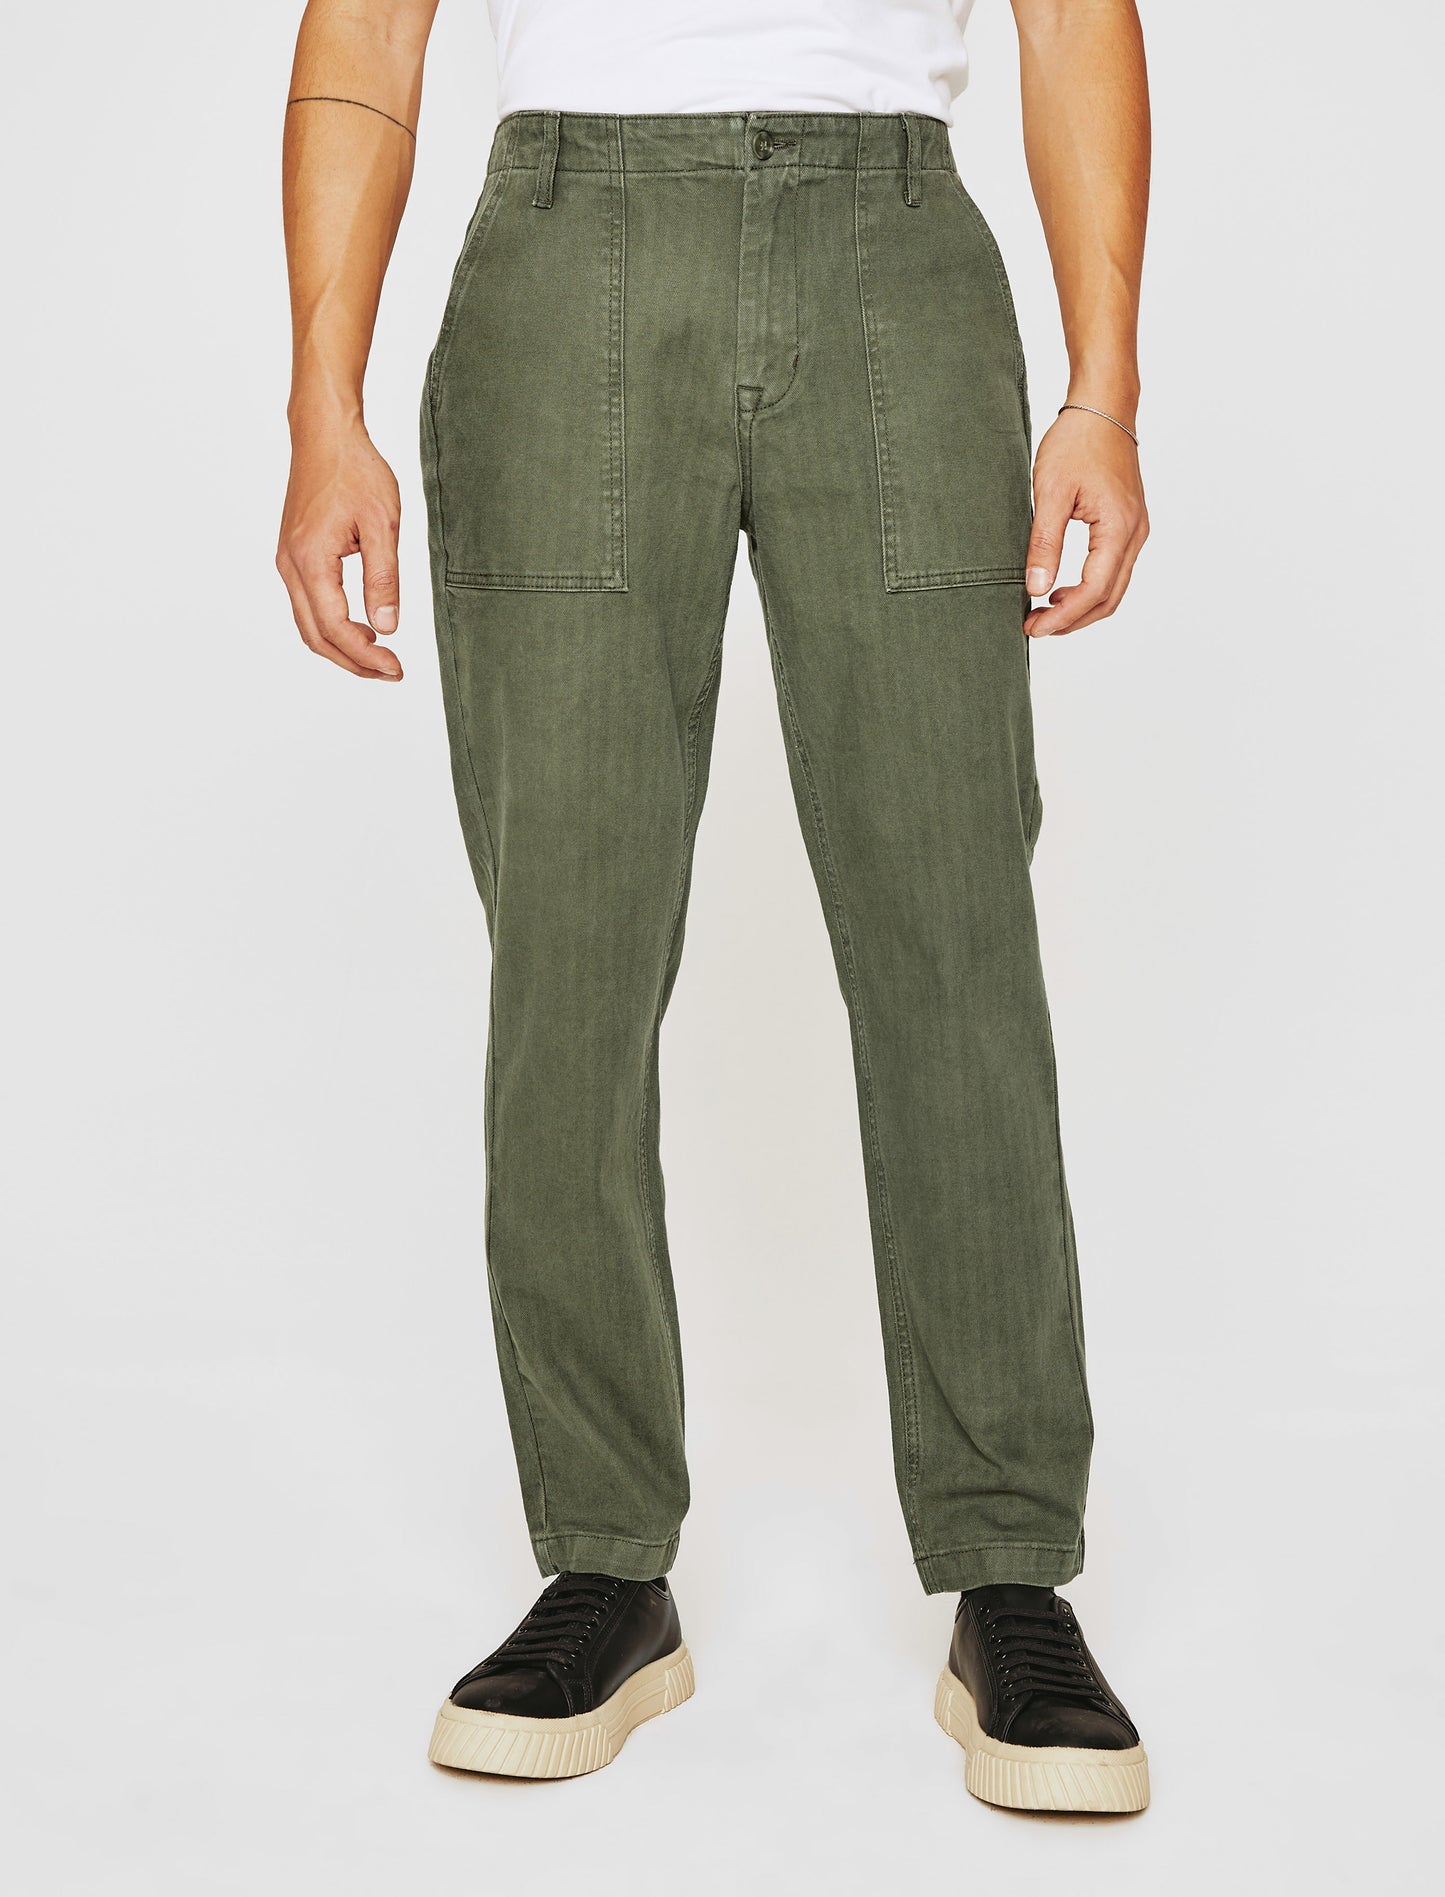 Wells Fatigue Valley Dark Infantry Green Relaxed Tapered Men Bottom Photo 2